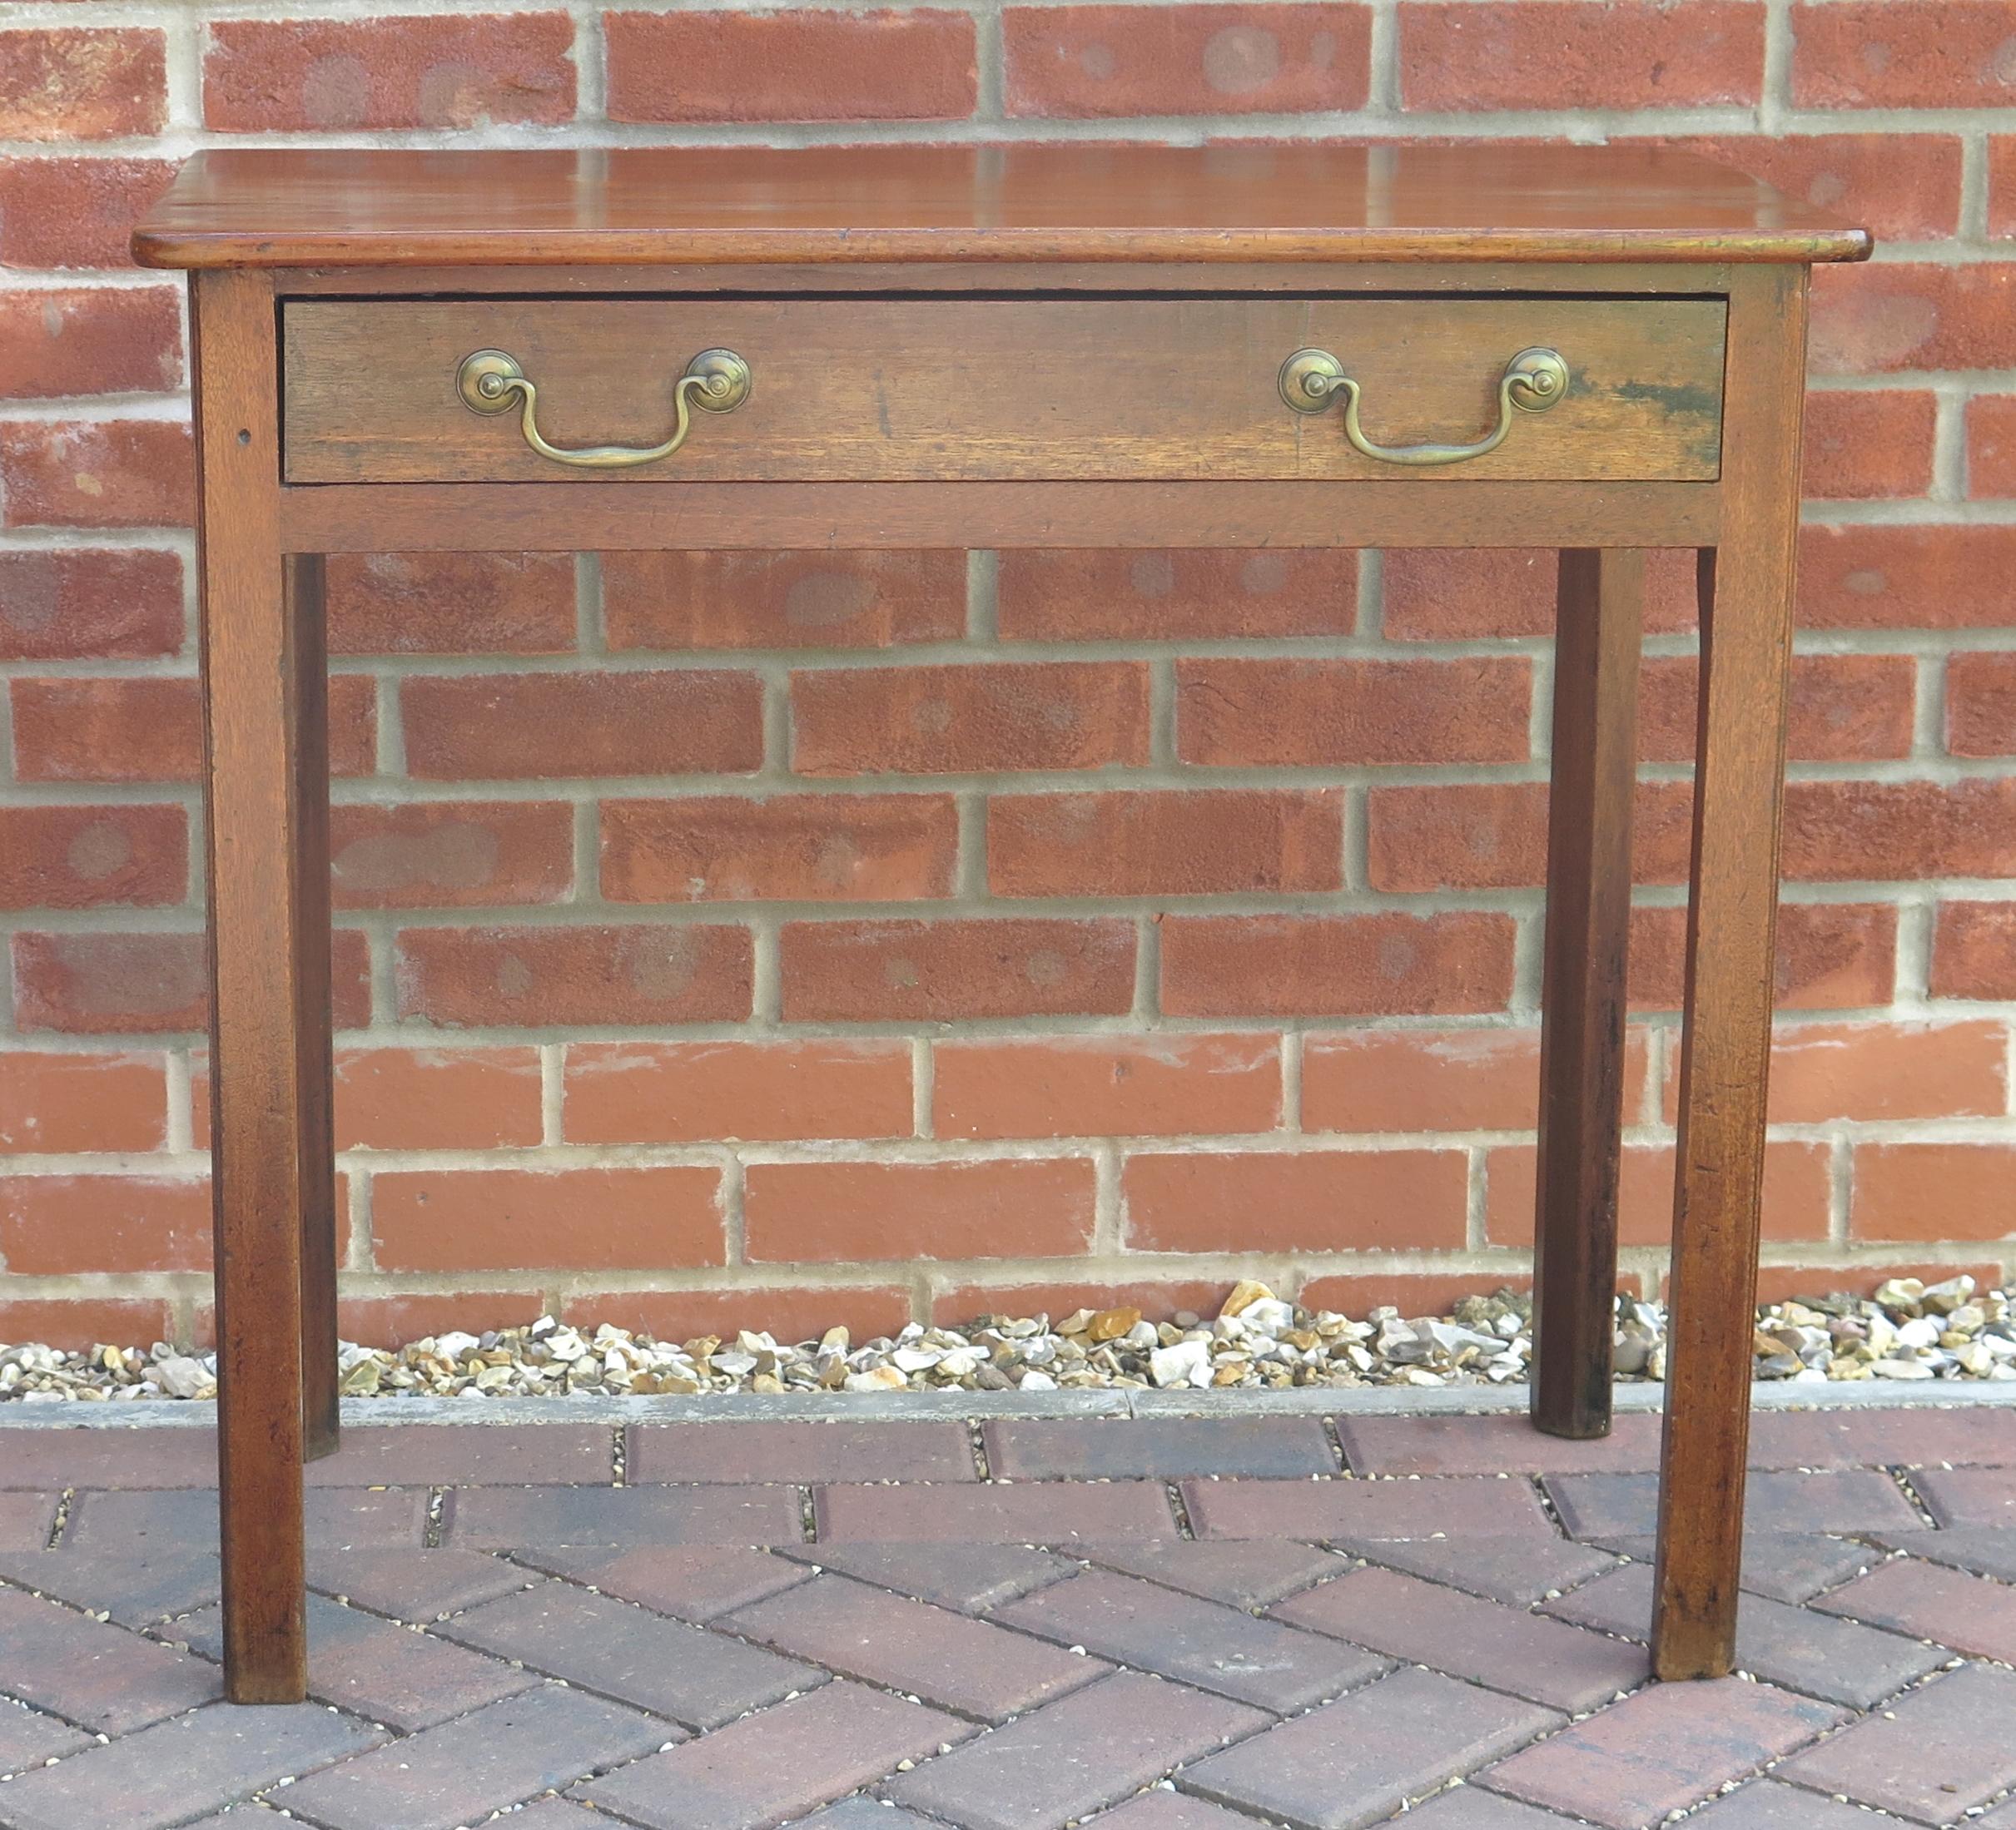 This is a well made solid hardwood ( probably fruitwood) side table with one single drawer, dating to the English George III period of the mid 18th century, circa 1760.

This is a well proportioned Georgian piece of English furniture with great